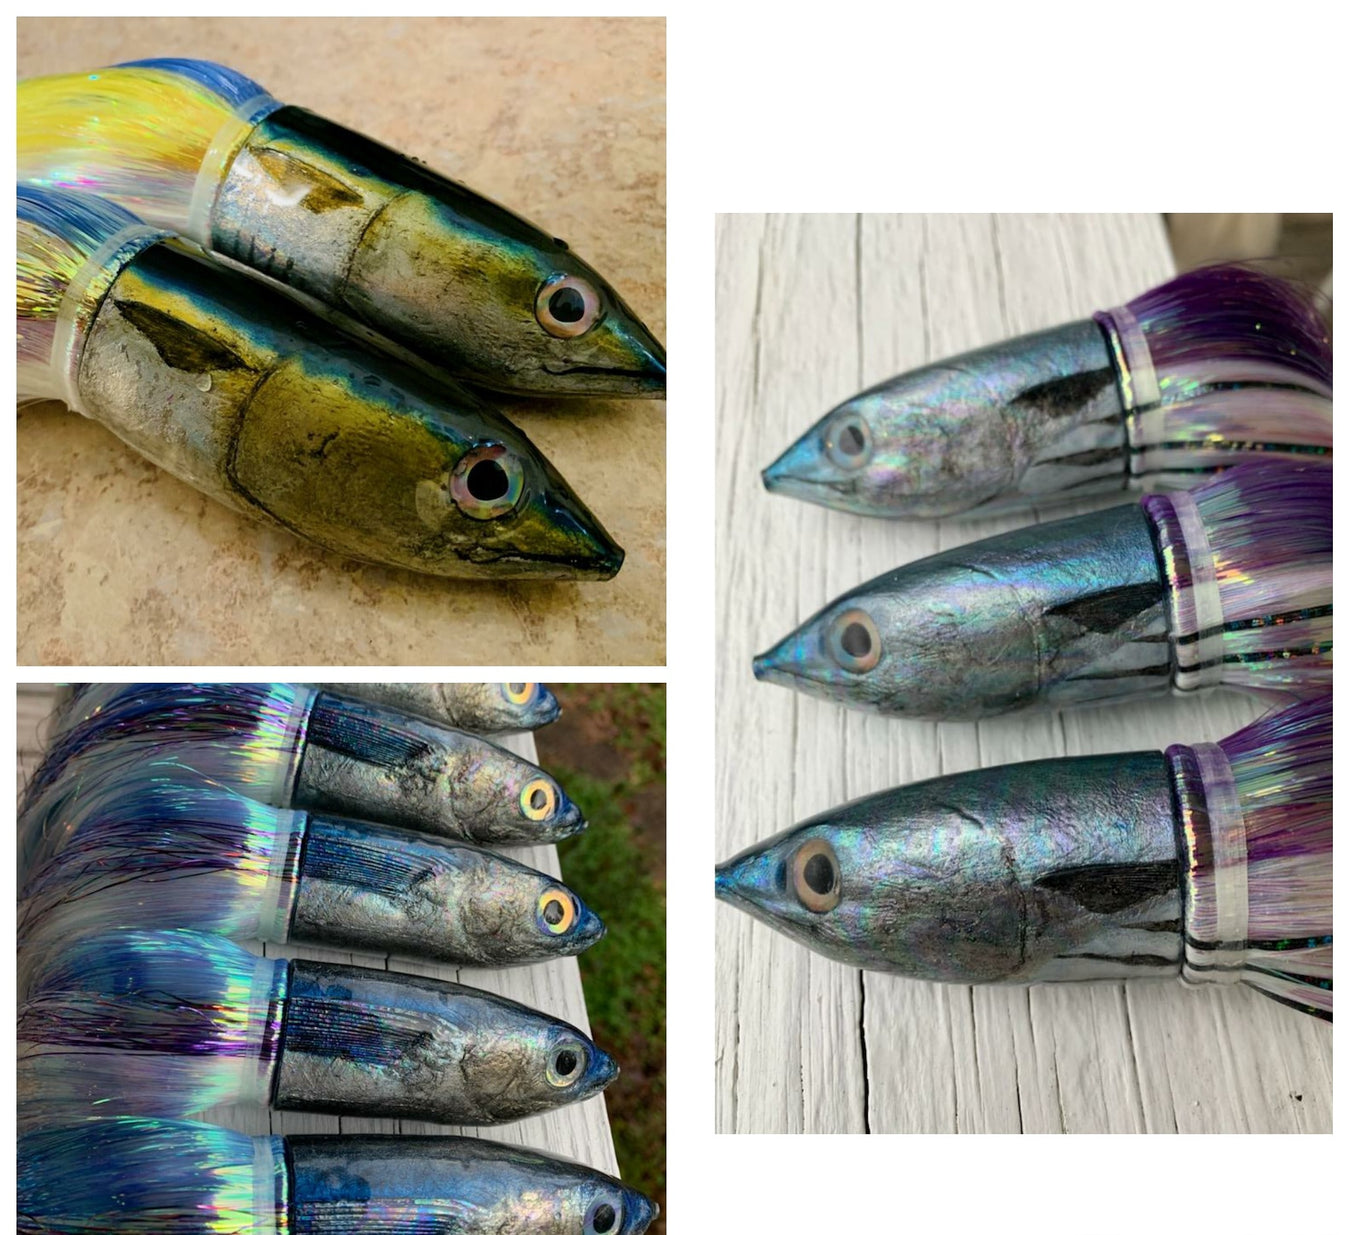 GZ Lures Big Game Supply on Instagram: NOW AVAILABLE - Brand New to GZ -  Pre-Built Fire Tailz “Ninja” Dredges. . New MOYES LURES Dark-N-Stormy,  Medium Sicario, & Large Ono Bullets .